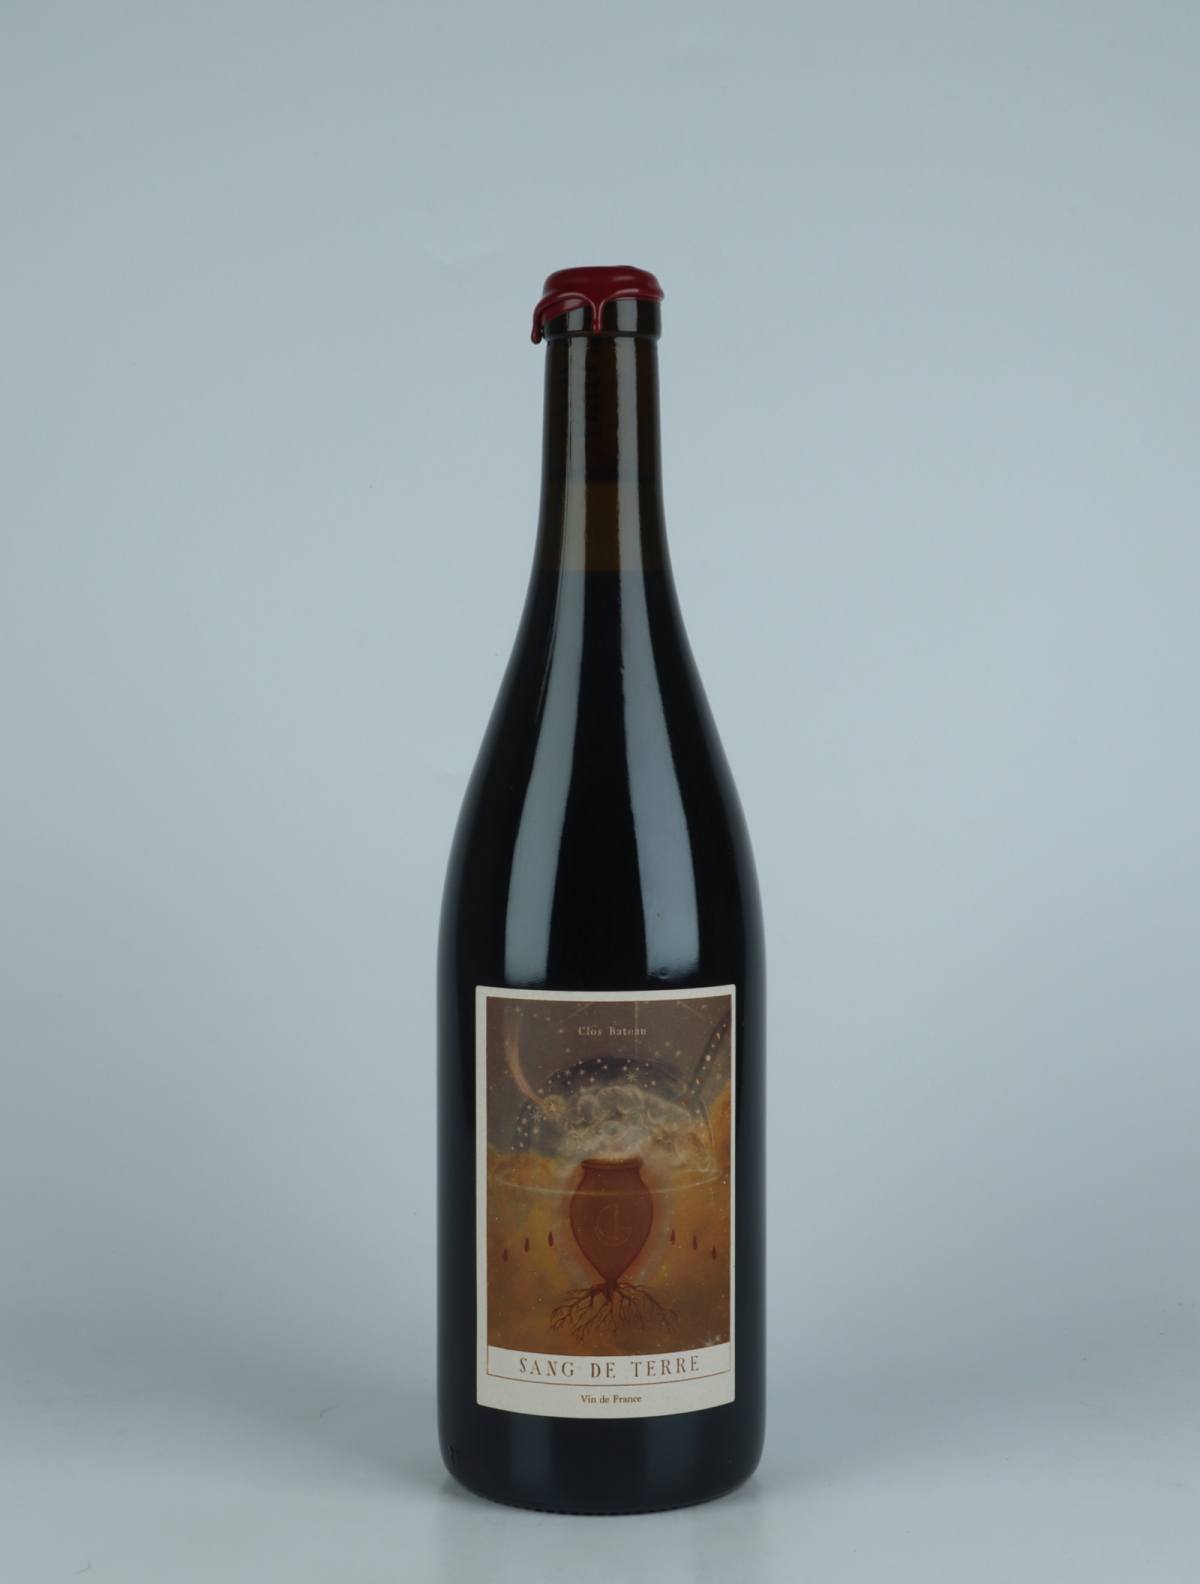 A bottle 2022 Sang de Terre Red wine from Clos Bateau, Beaujolais in France